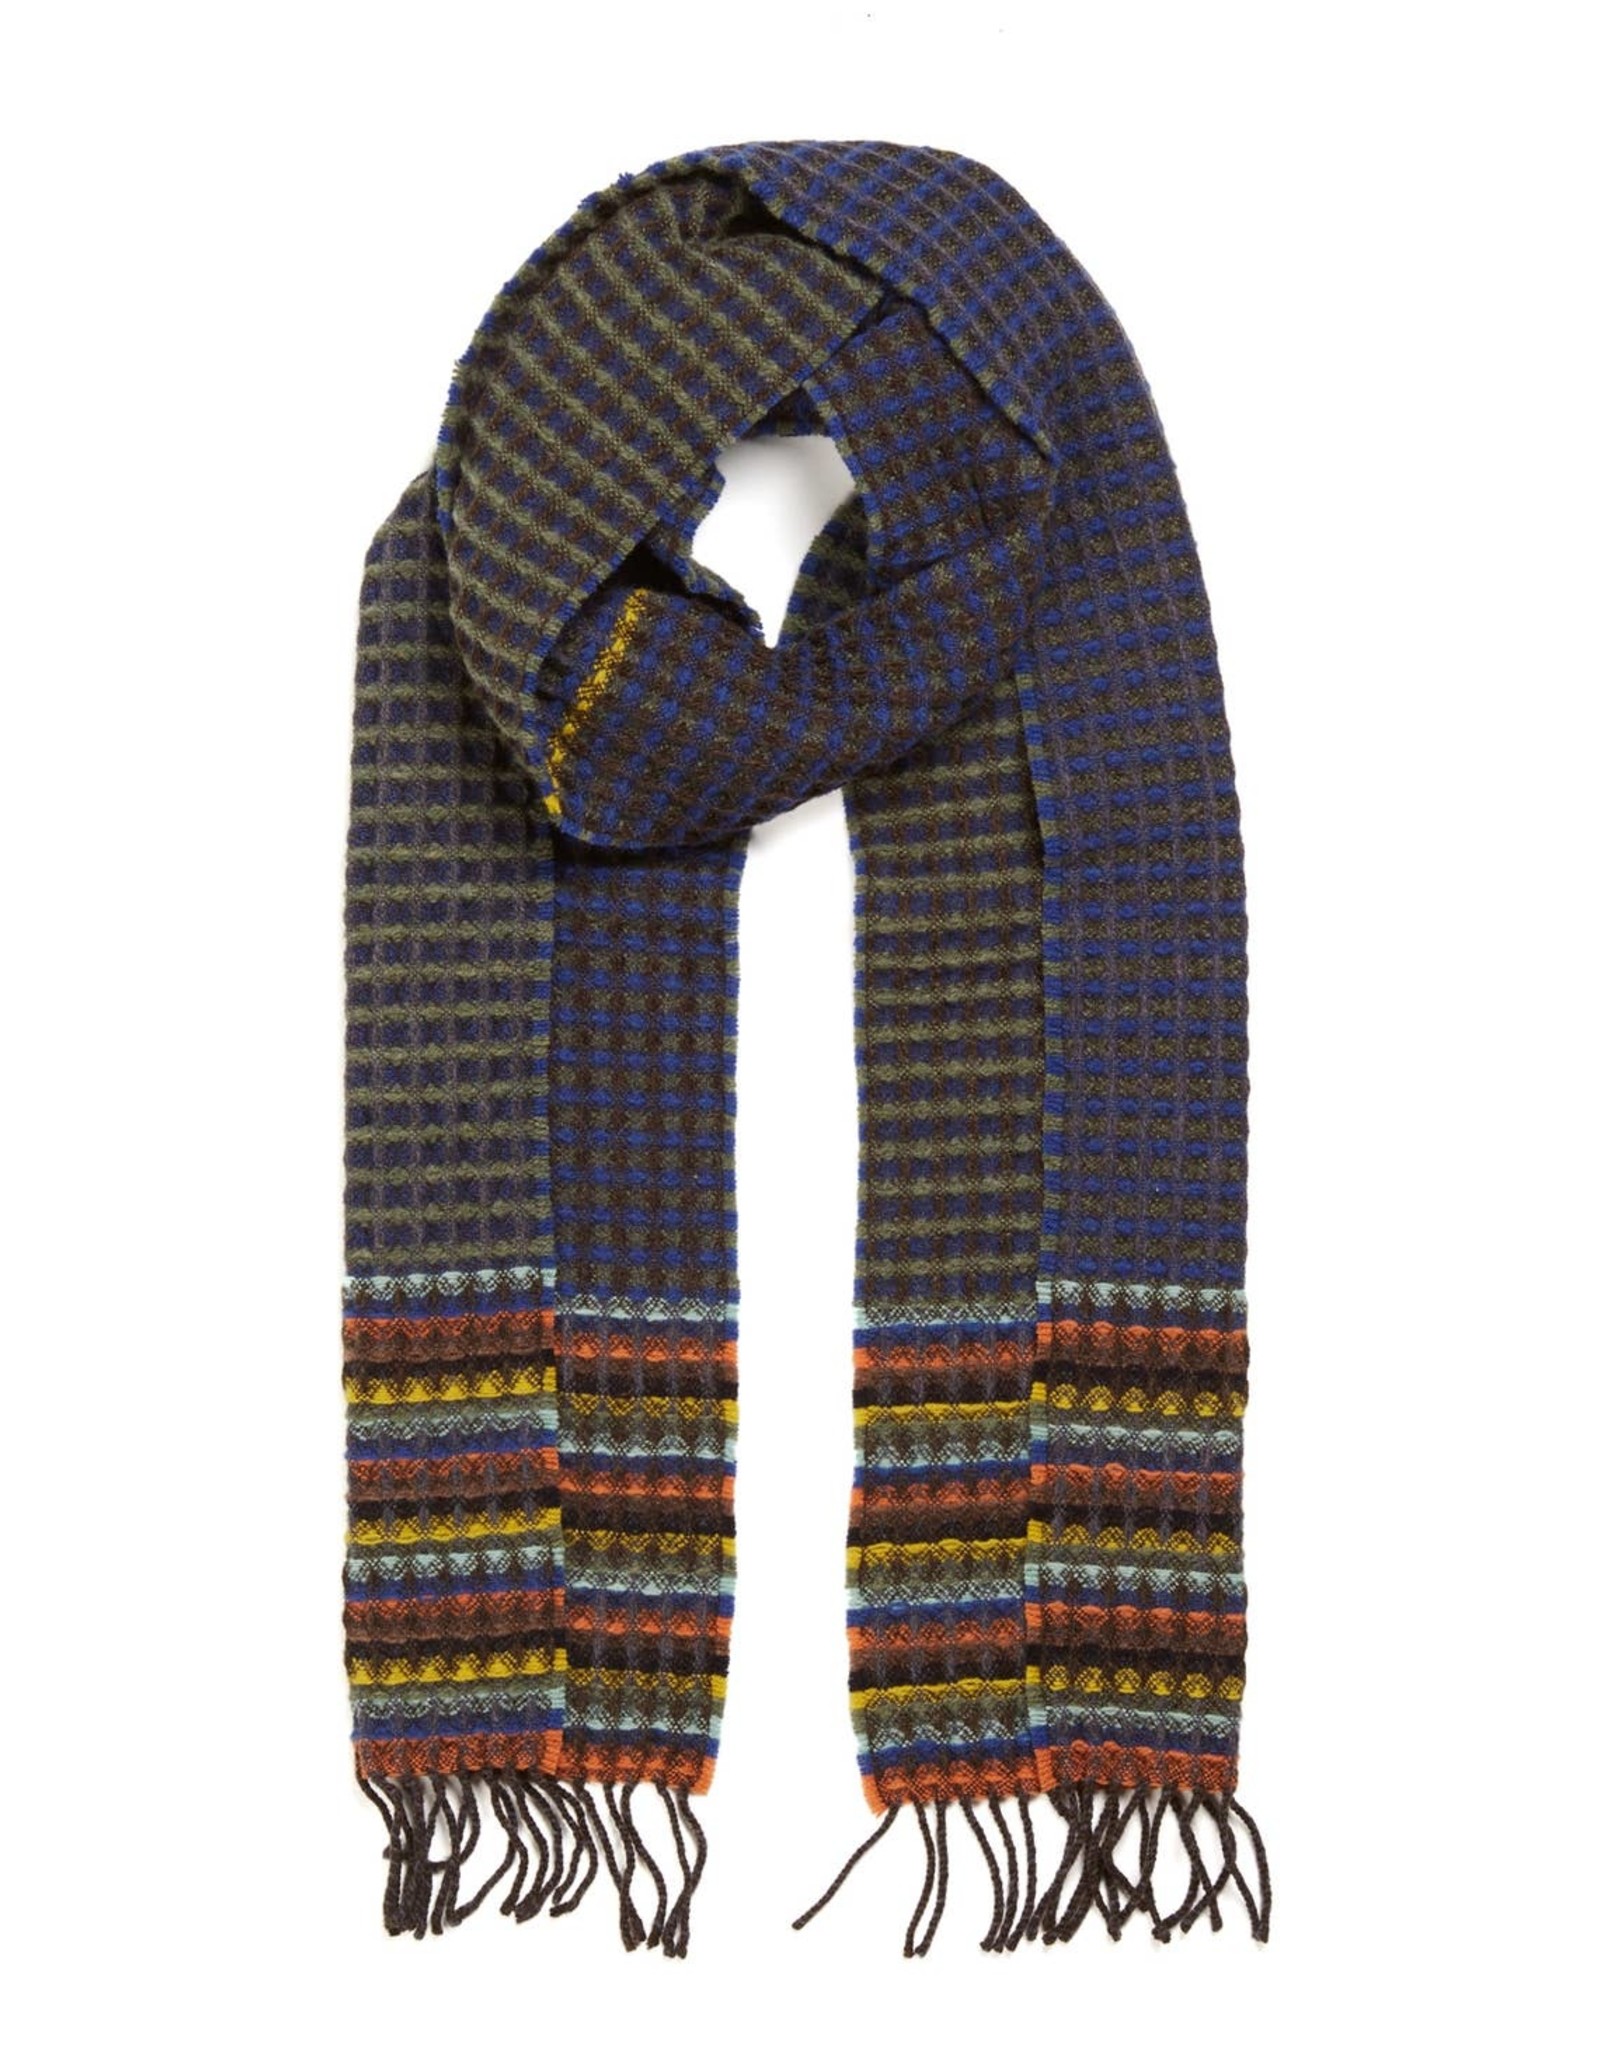 Wallace Sewell Wallace Sewell Lambswool Scarf - Voltaire Airforce